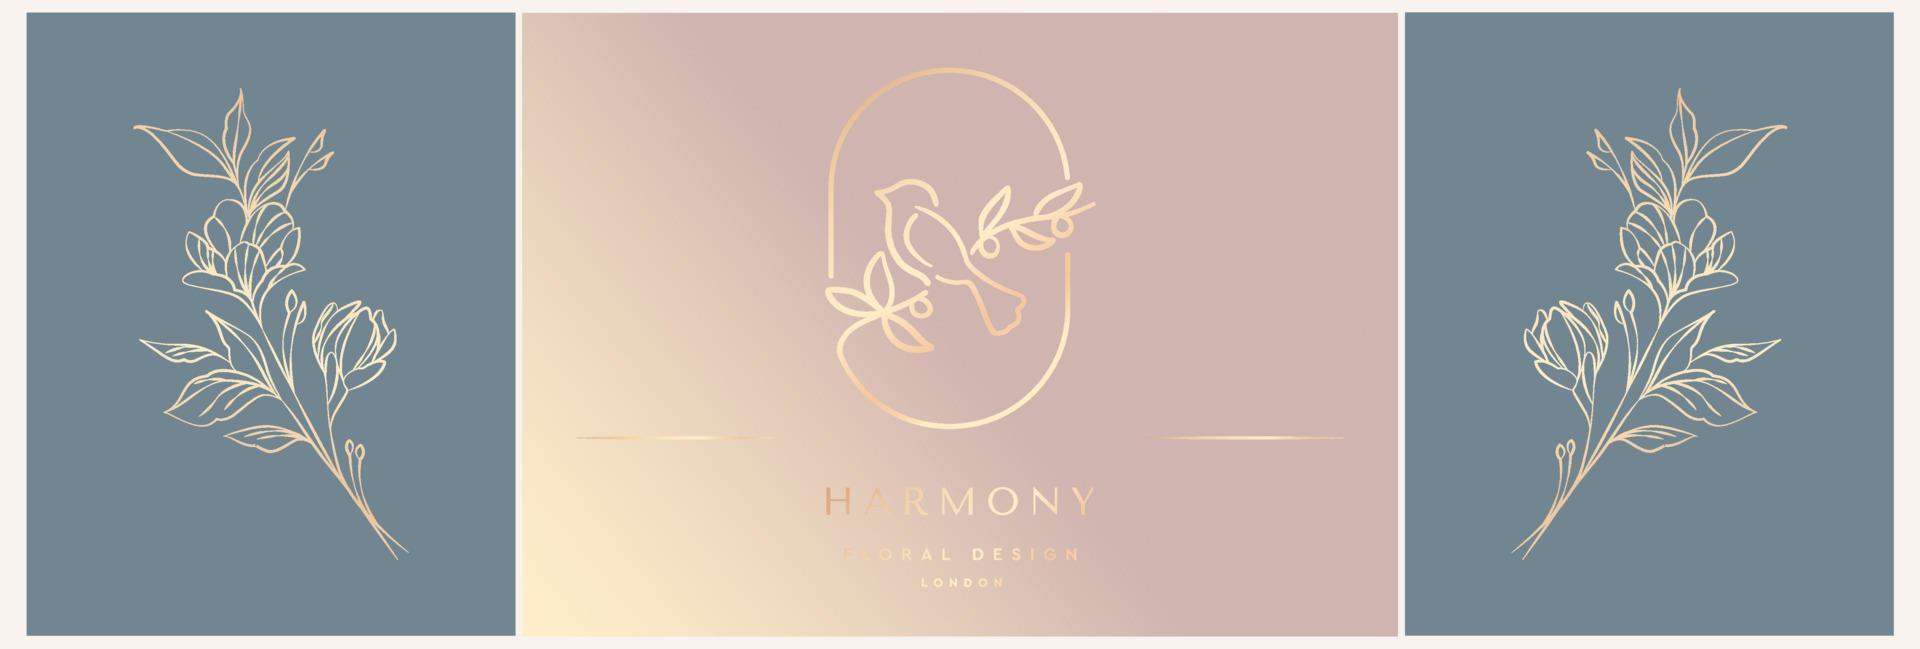 Set of logo design templates in trendy linear style in gold tones. Dawn with flowers - luxury and jewelry concepts for exclusive services and products, beauty and spa industry vector